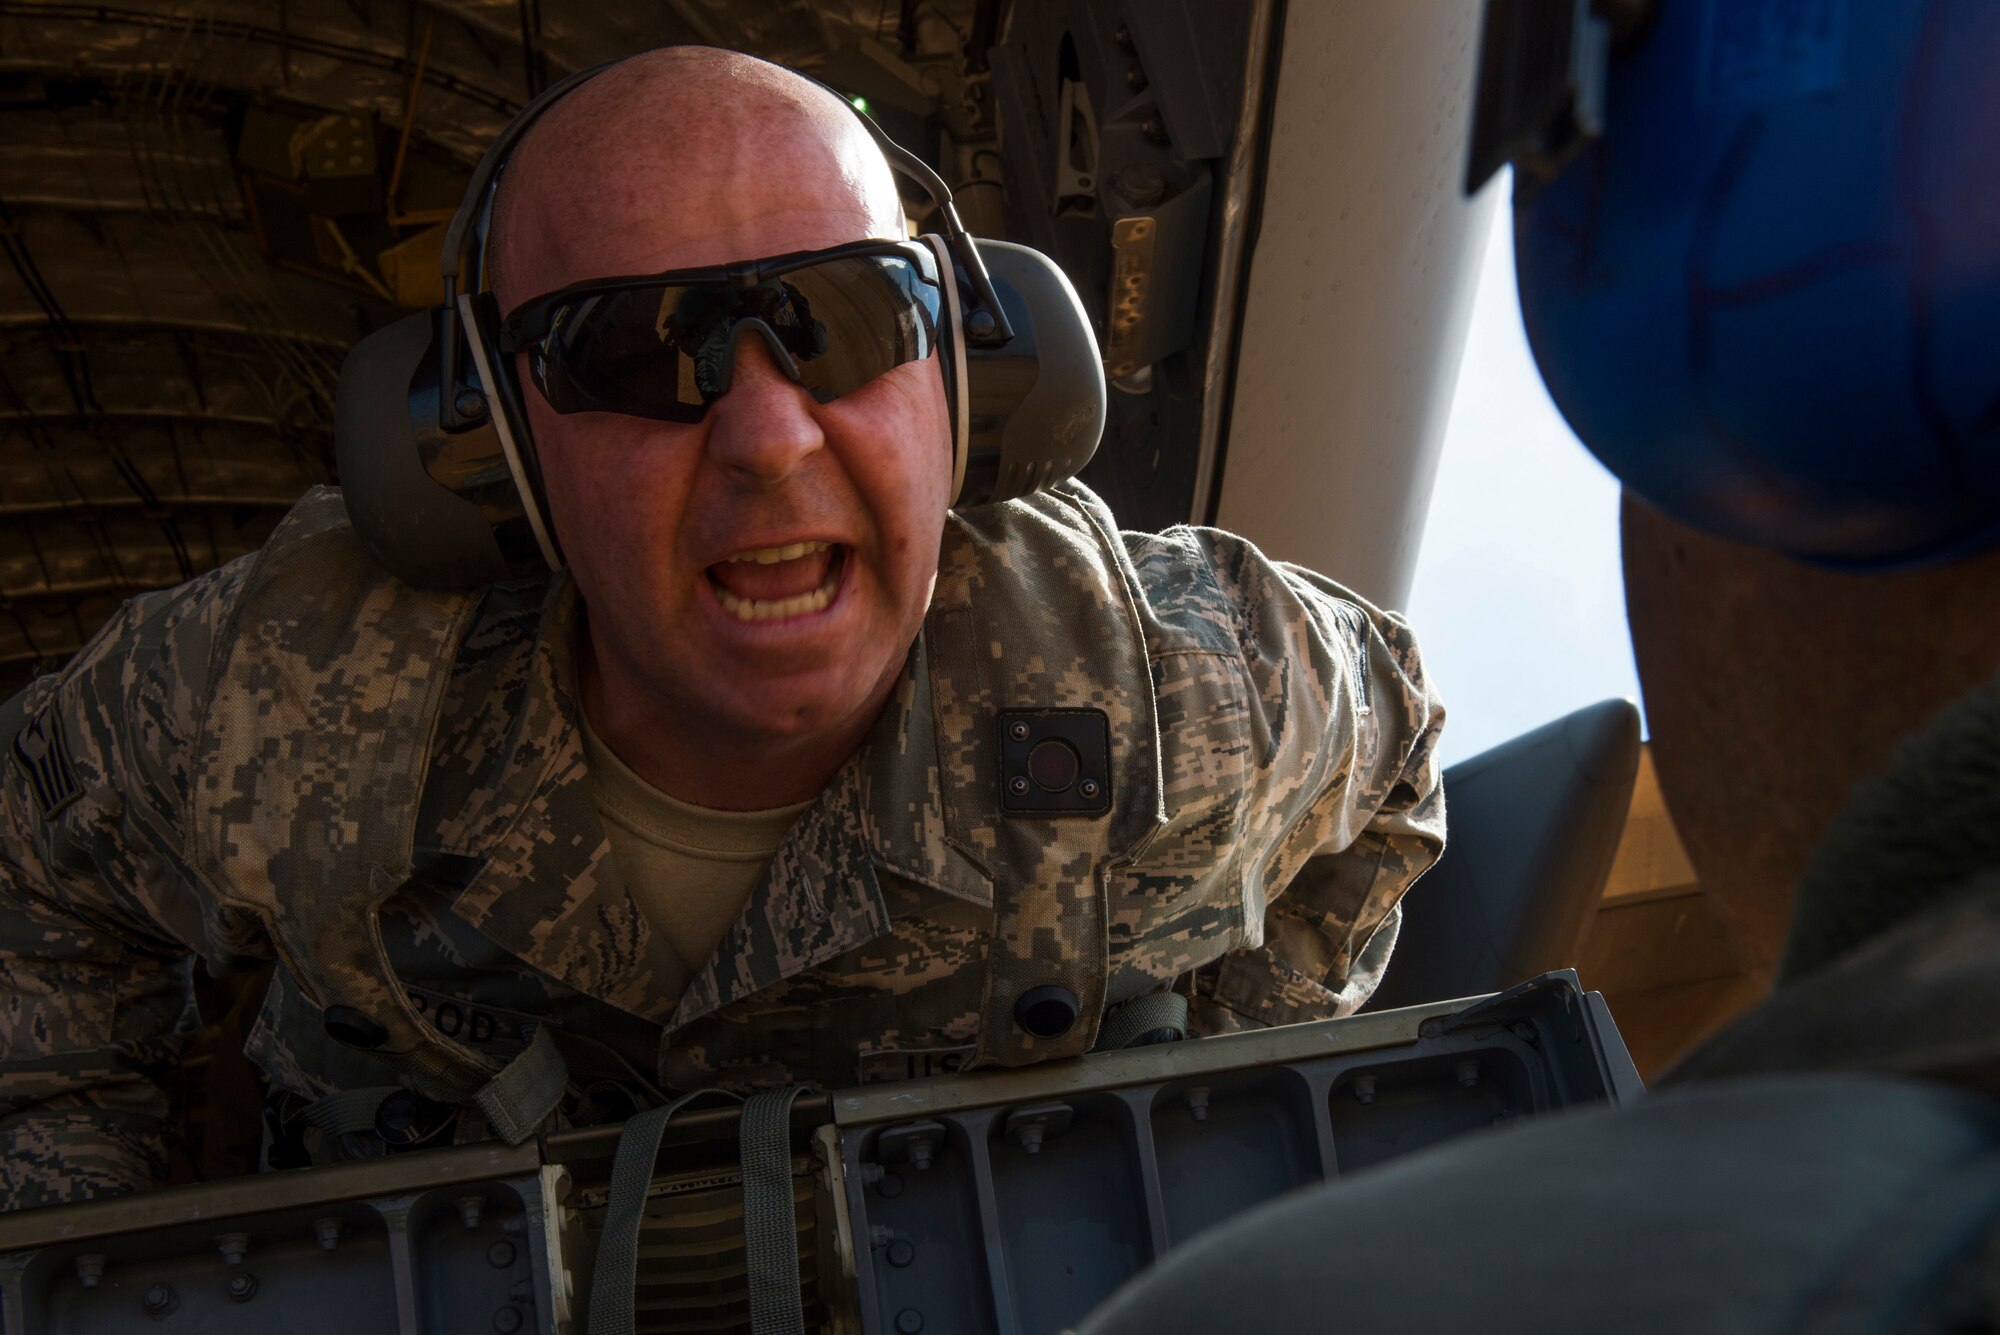 Staff Sgt. Thomas Sherrod, 817th Contingency Response Group aerial porter stationed at Joint Base McGuire-Dix-Lakehurst, N.J., speaks to an Airmen during a  training exercise at the Joint Readiness Training Center at Fort Polk, La., Jan. 17, 2015. JRTC is a 34th Combat Training Squadron exercise for the U.S. Army that improves unit readiness by providing realistic, stressful, joint and combined arms training across the full spectrum of conflict. The Airmen helped support the exercise, and also provided an opportunity for internal training. (U.S. Air Force photo/Staff Sgt. Gustavo Gonzalez/RELEASED)